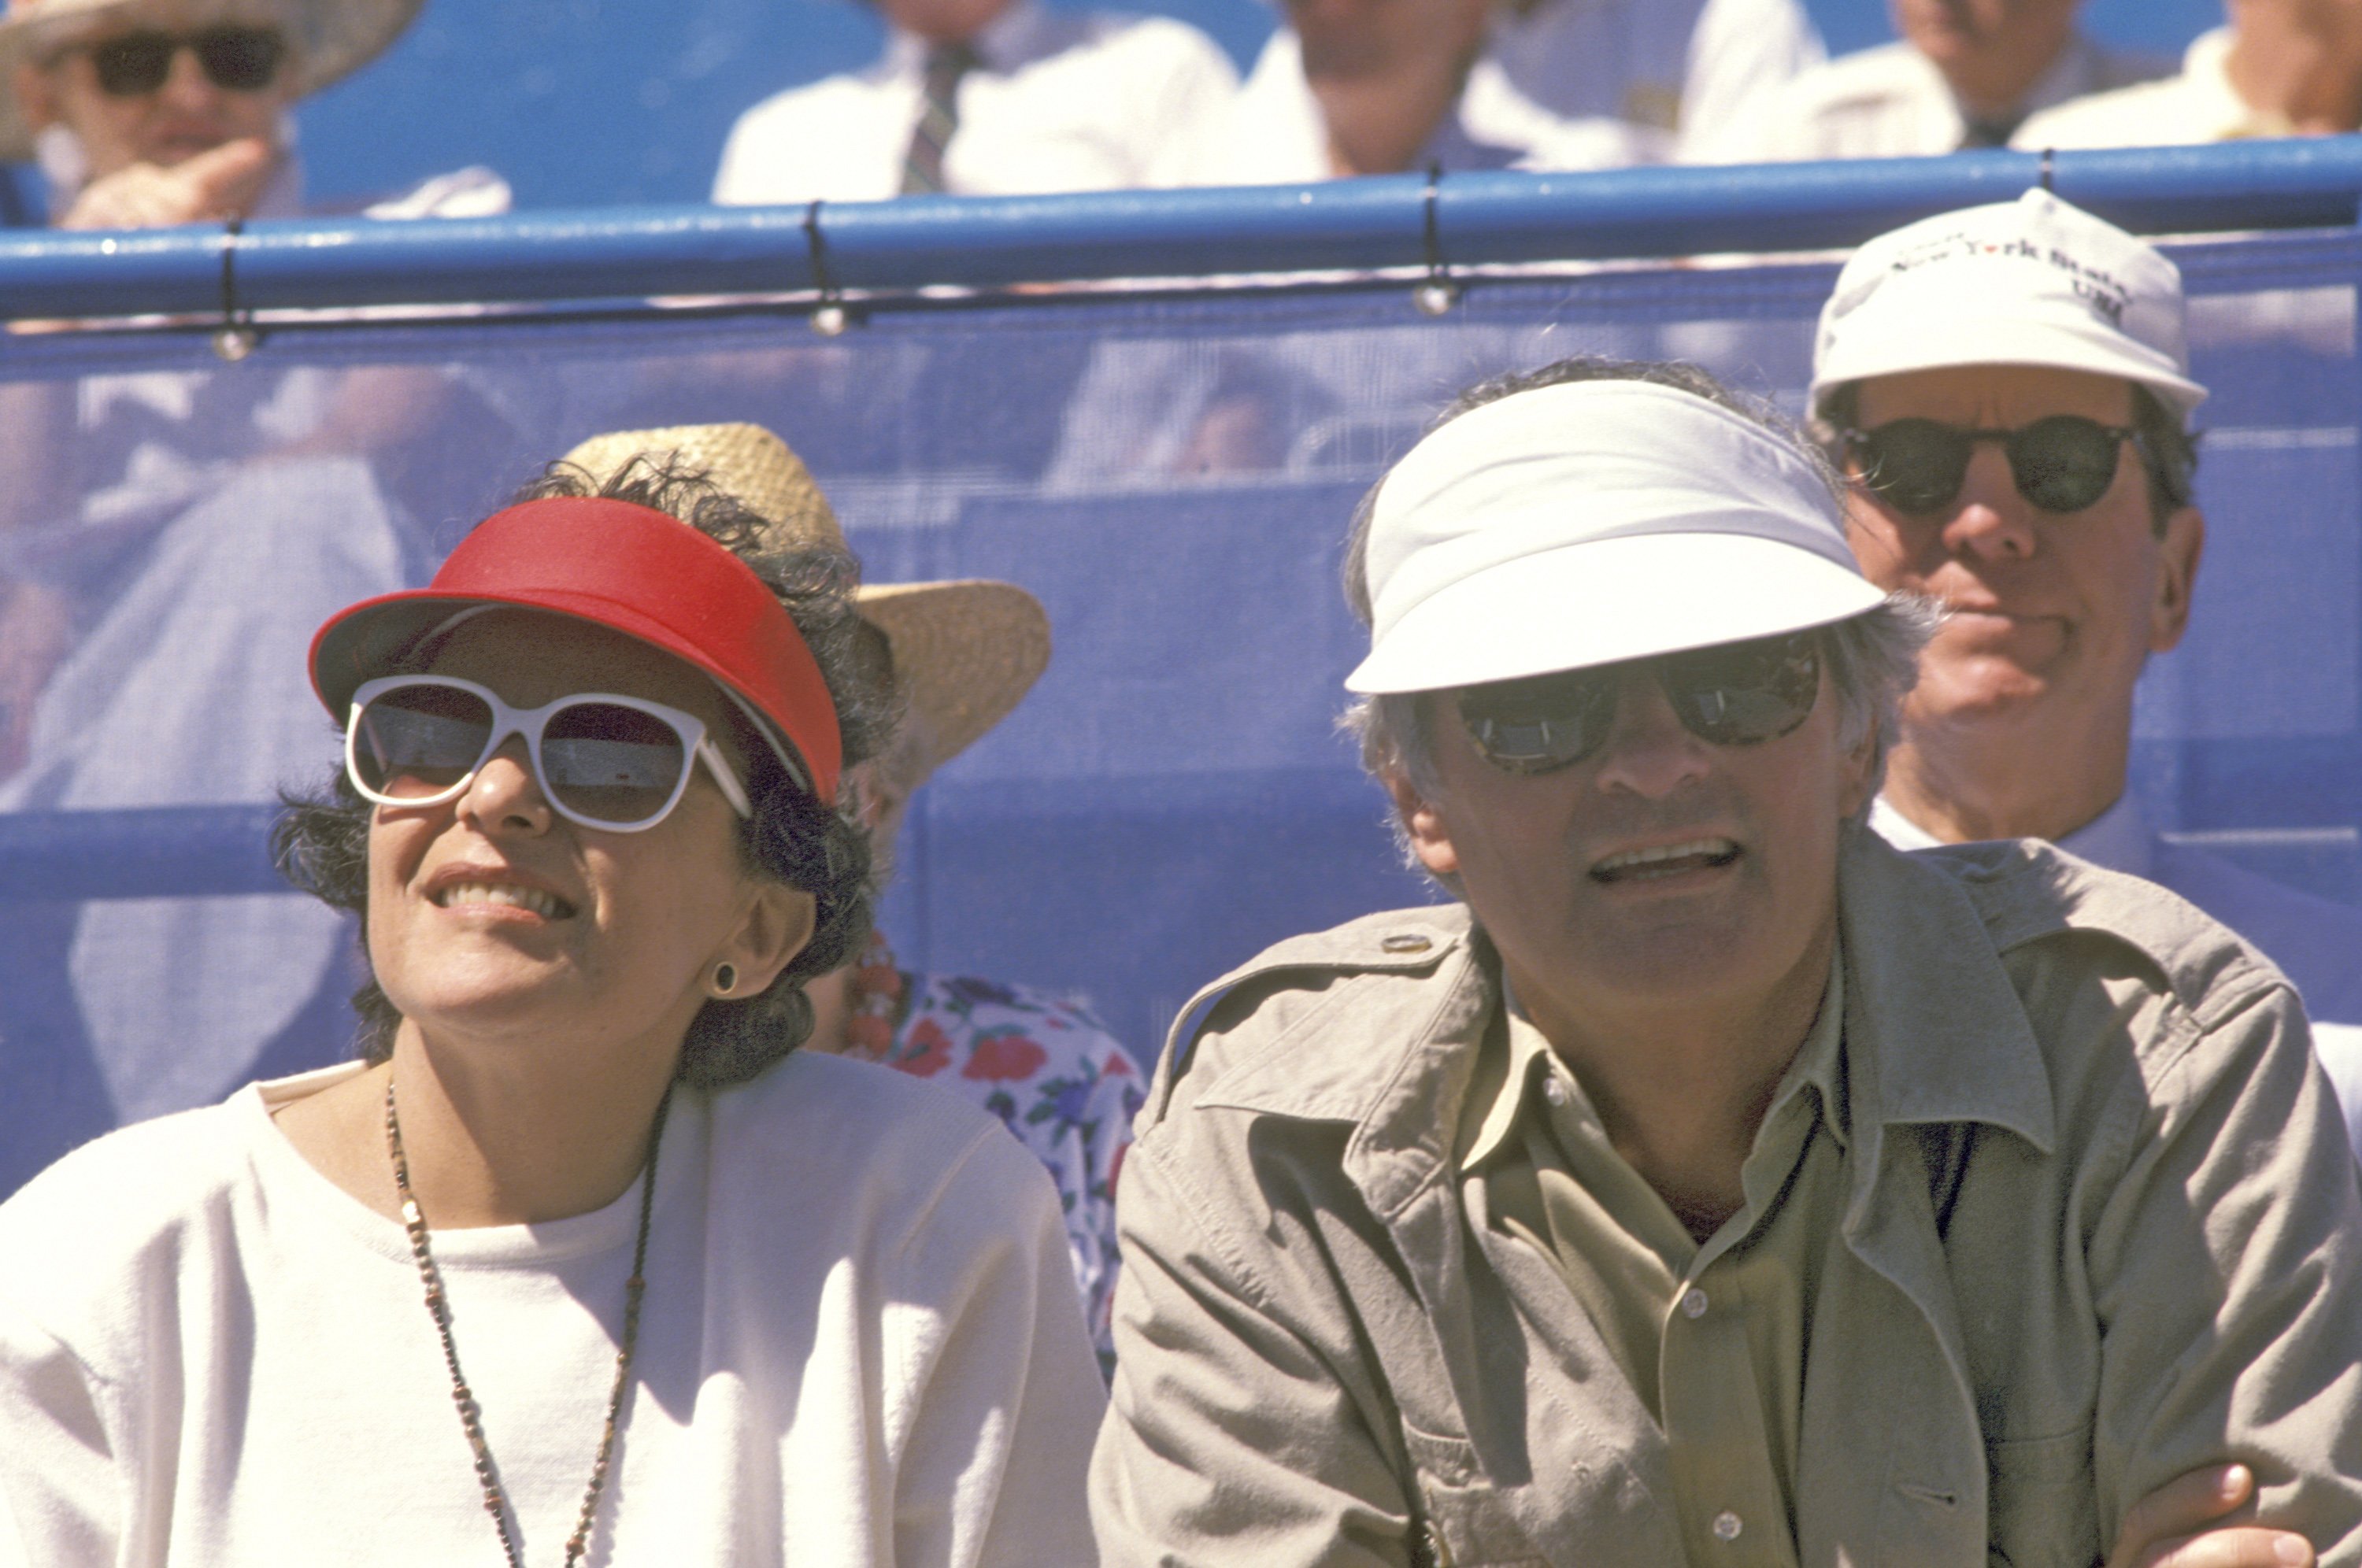 Arlene and Alan Alda during the U.S. Open on September 8, 1990, in Queens, New York | Source: Getty Images